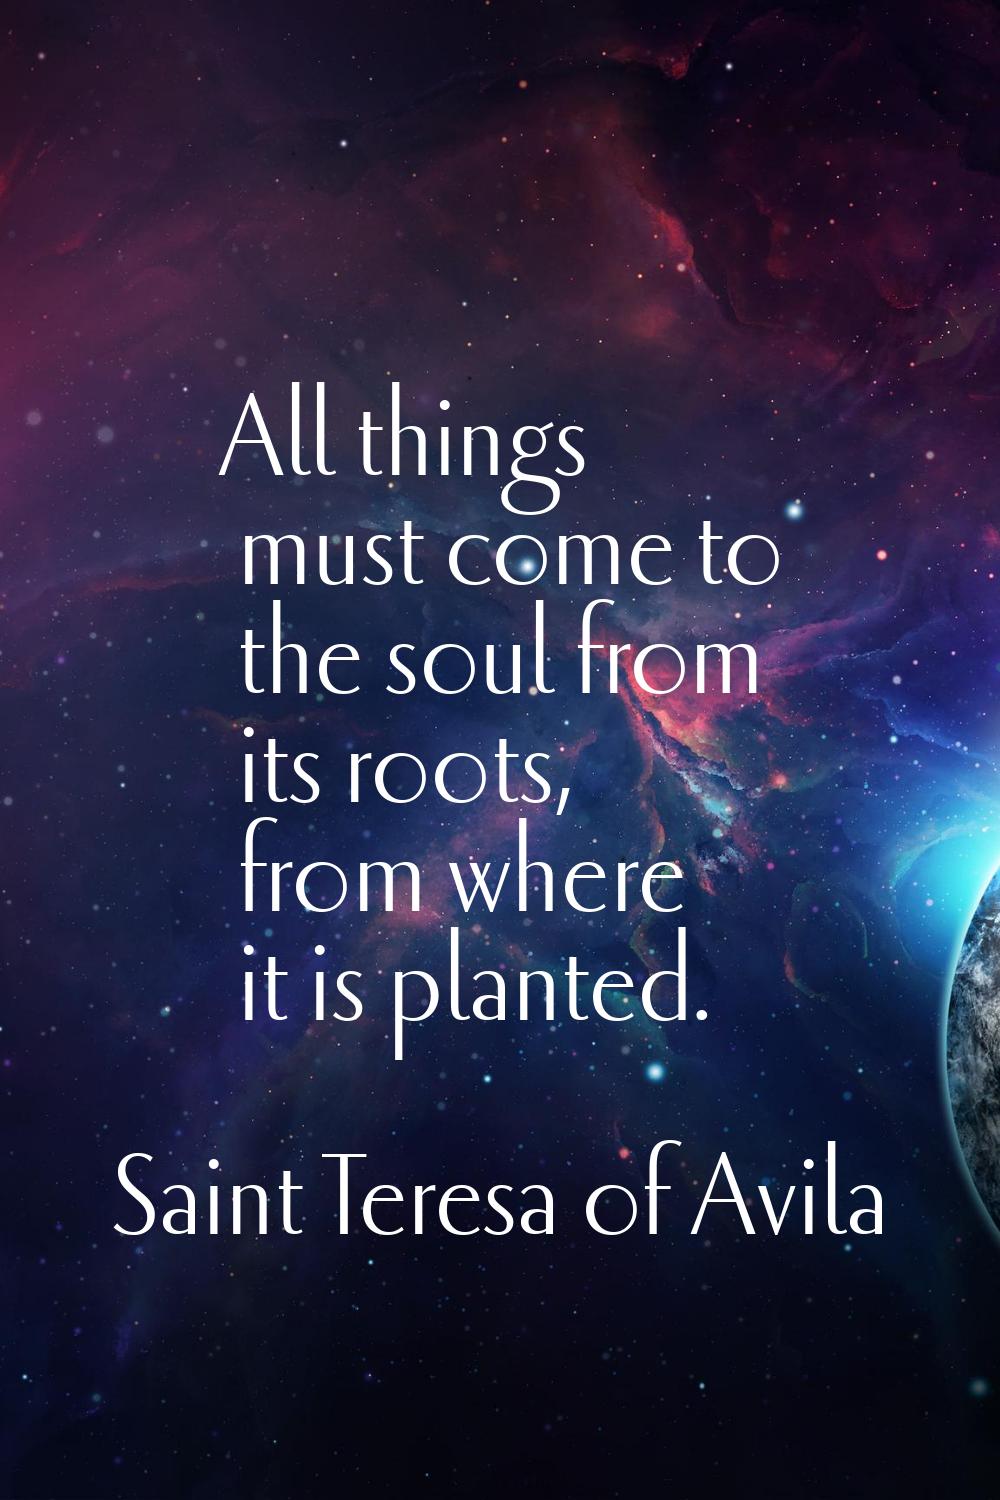 All things must come to the soul from its roots, from where it is planted.